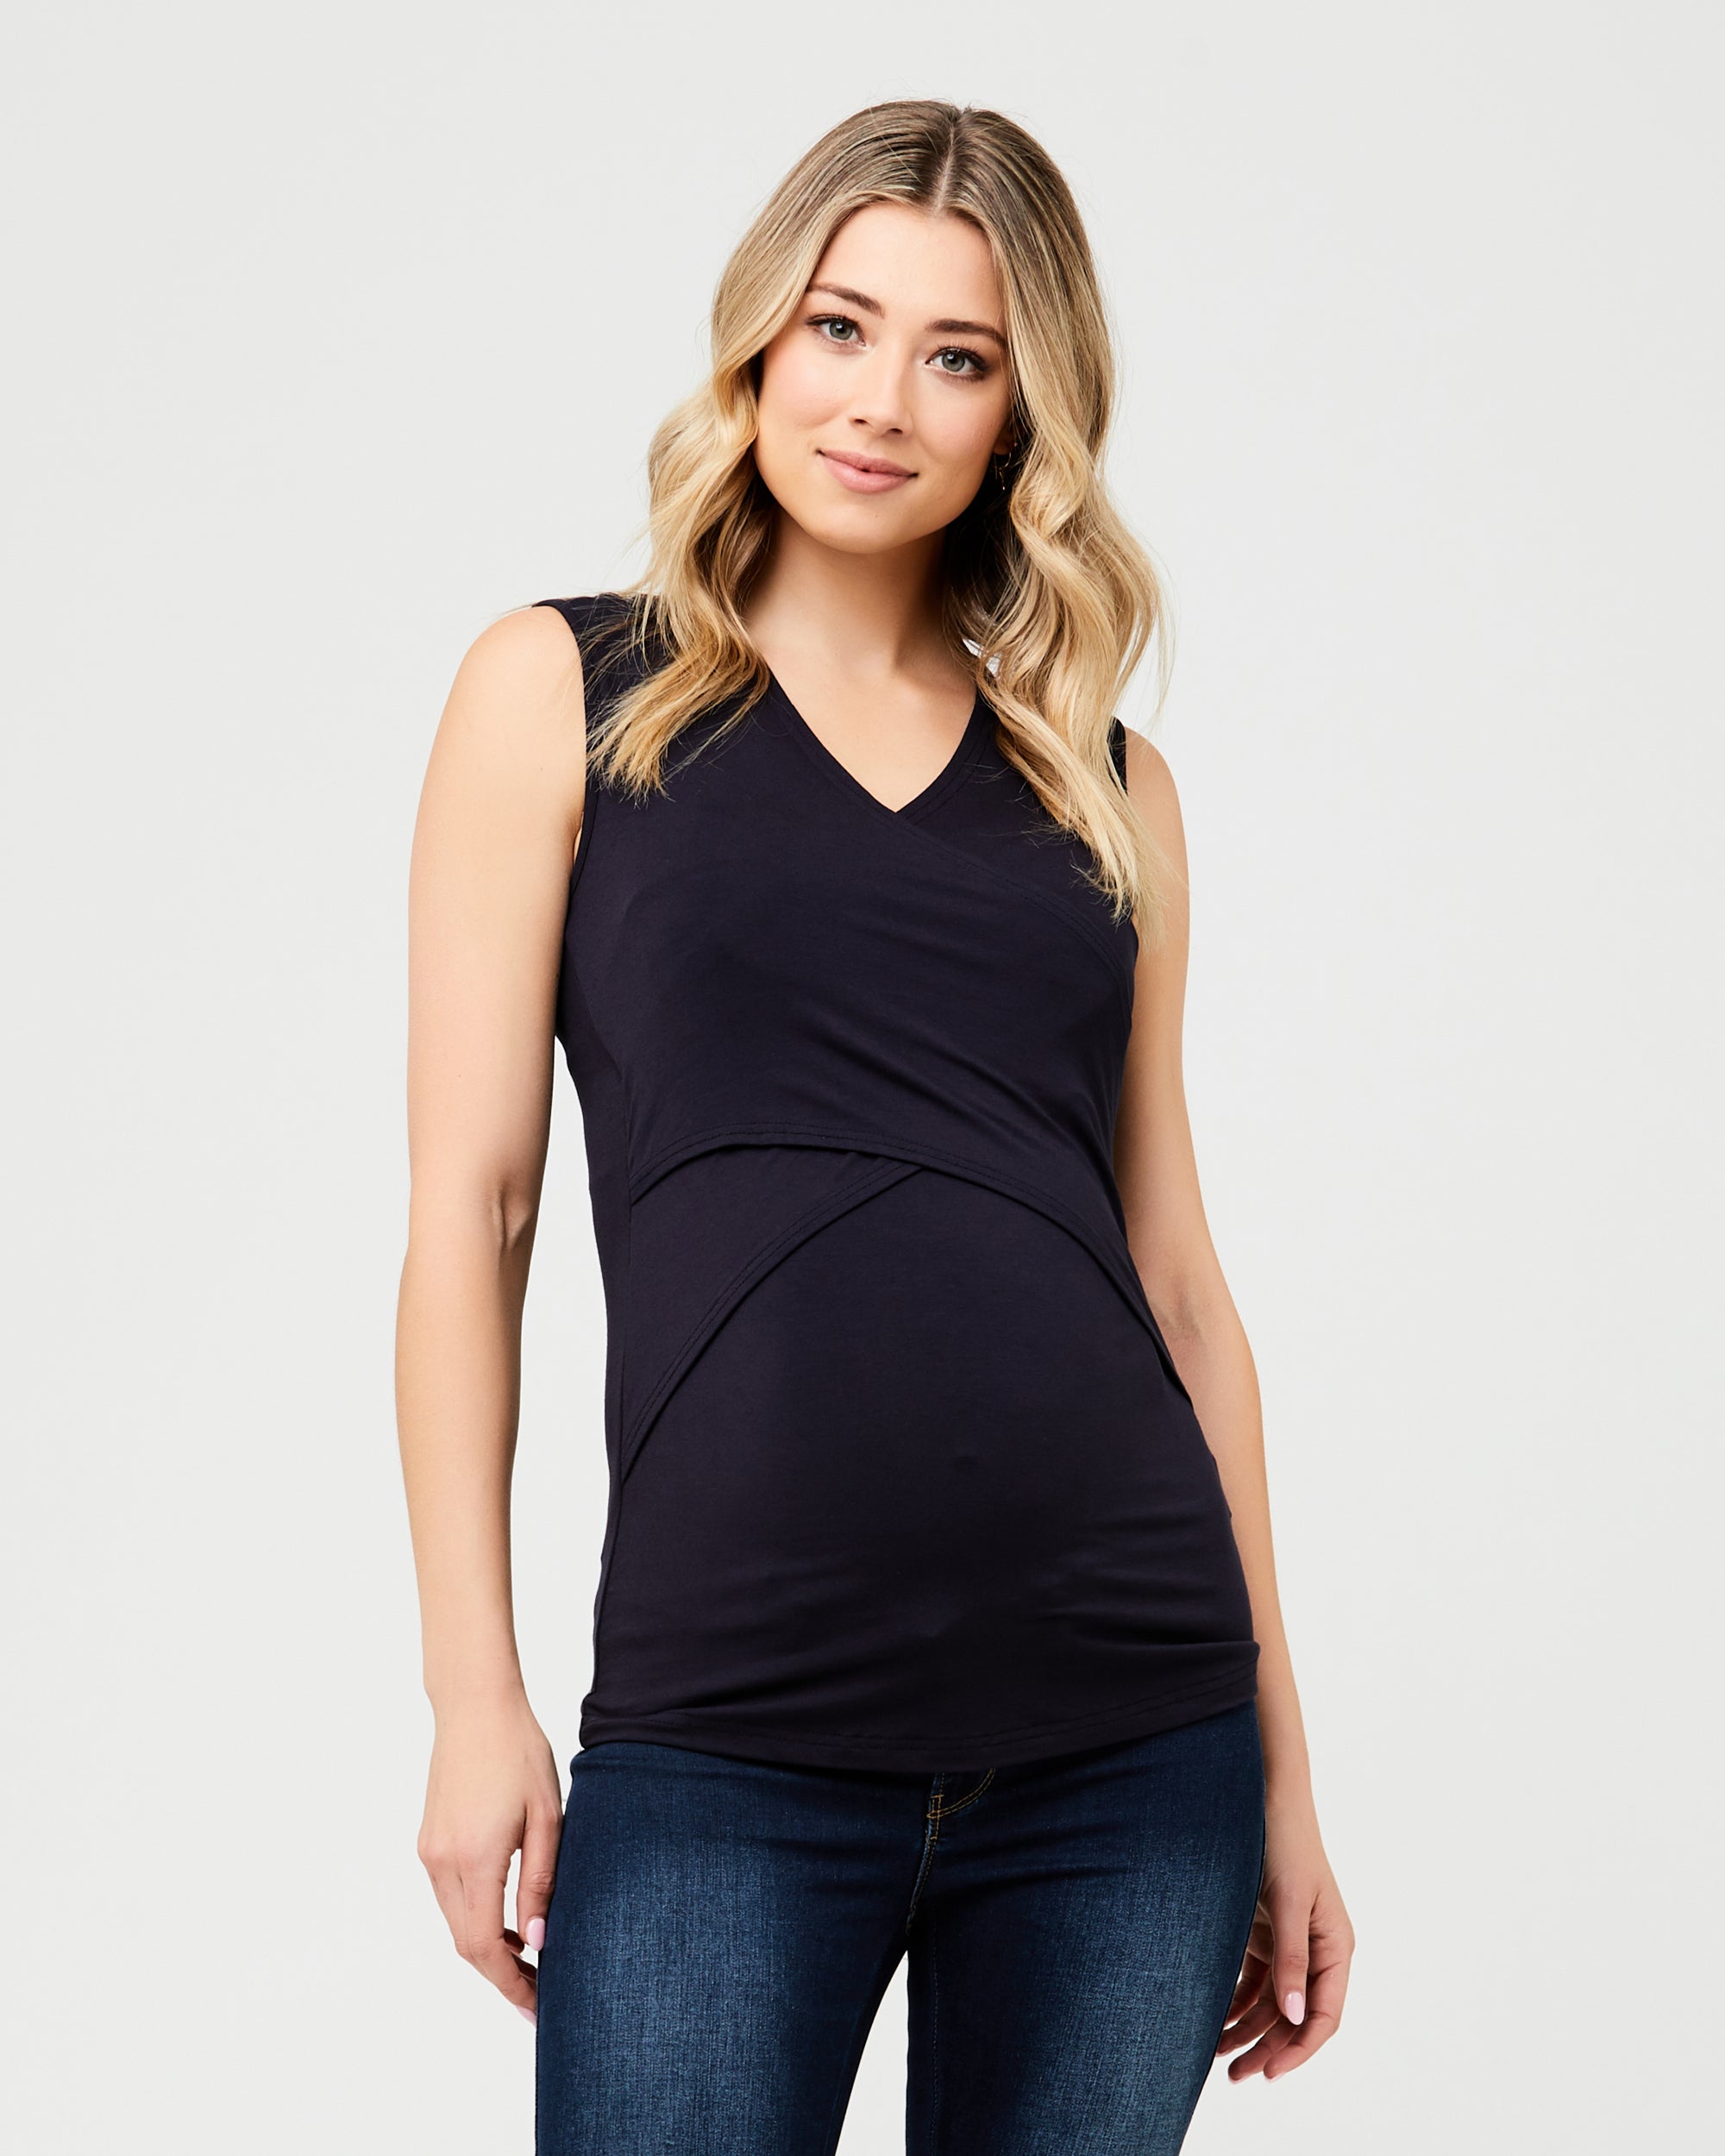 Maternity Tops - Stylish & Comfortable Maternity Tops Australia Wide – Page  3